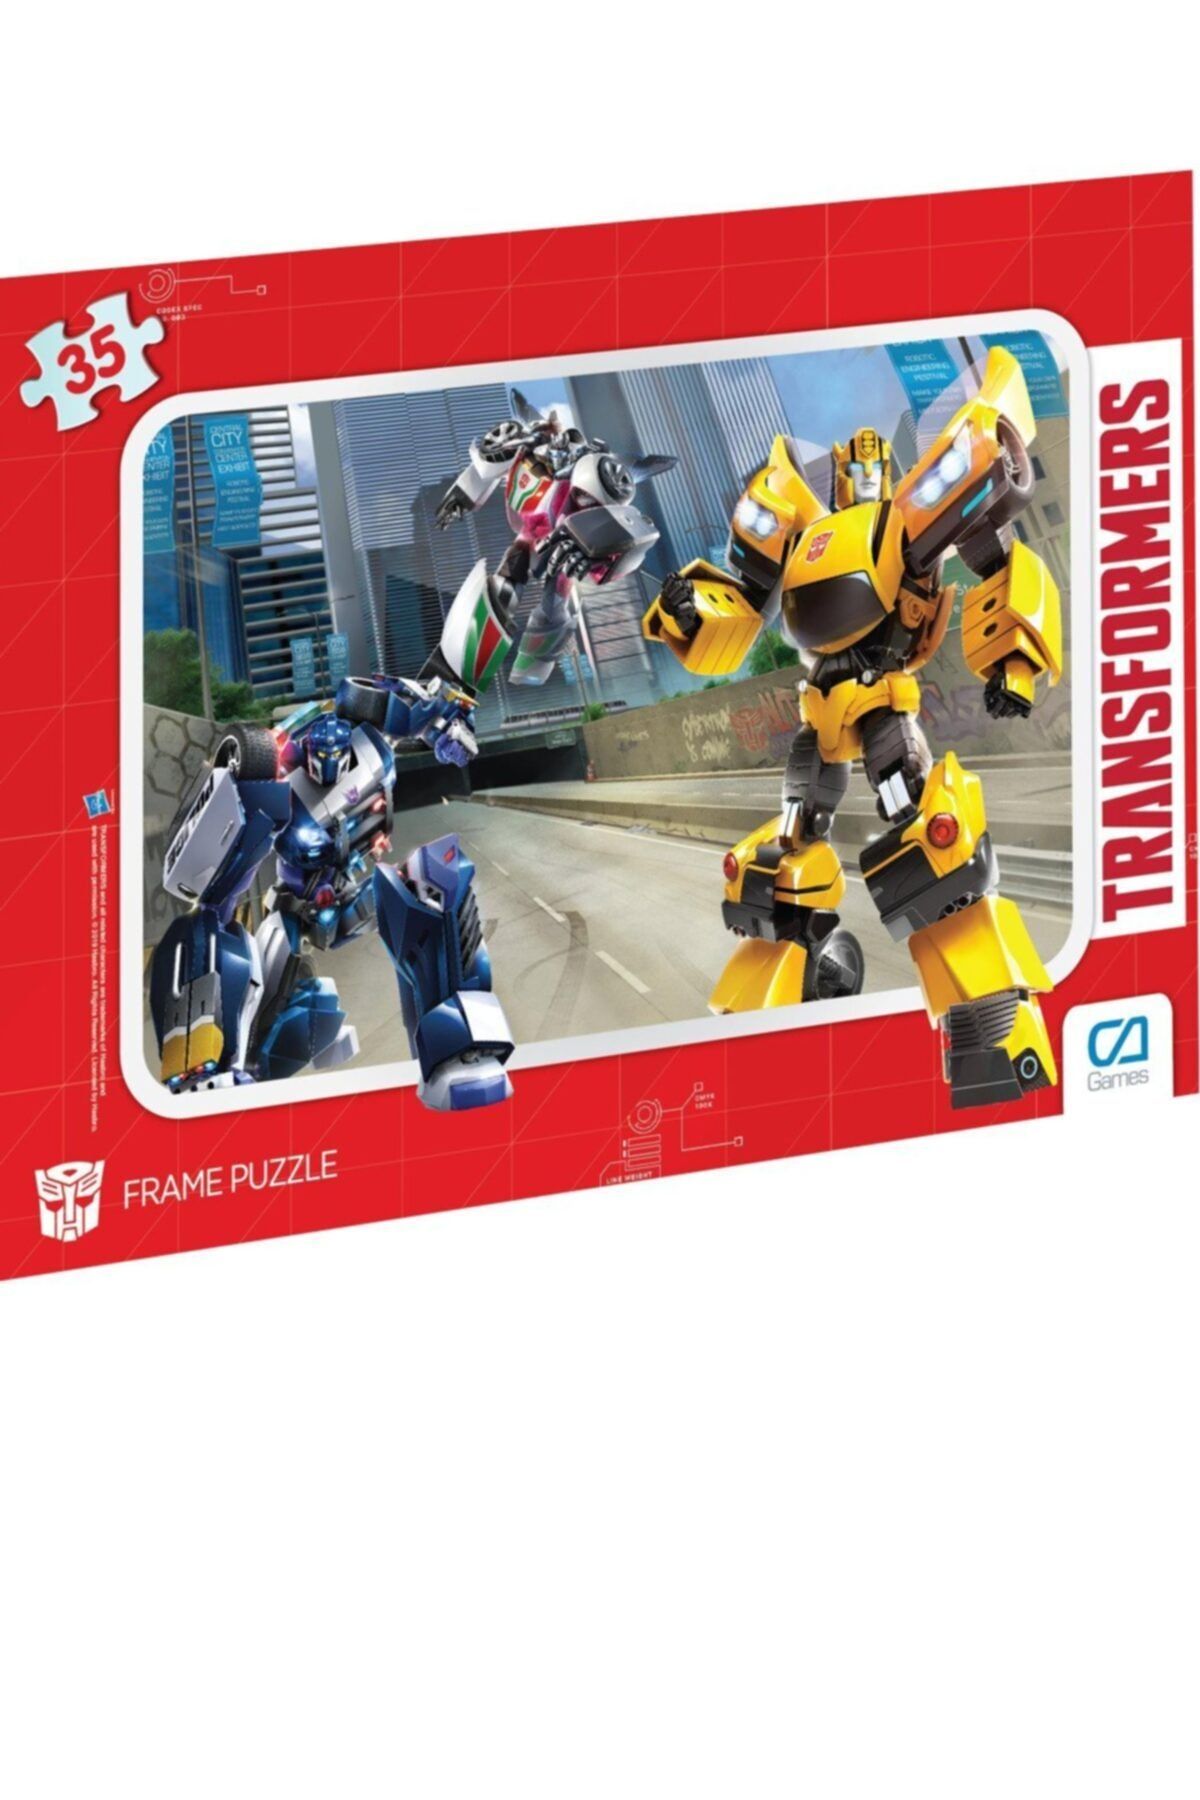 CA Games Transformers Frame Puzzle 35 -2